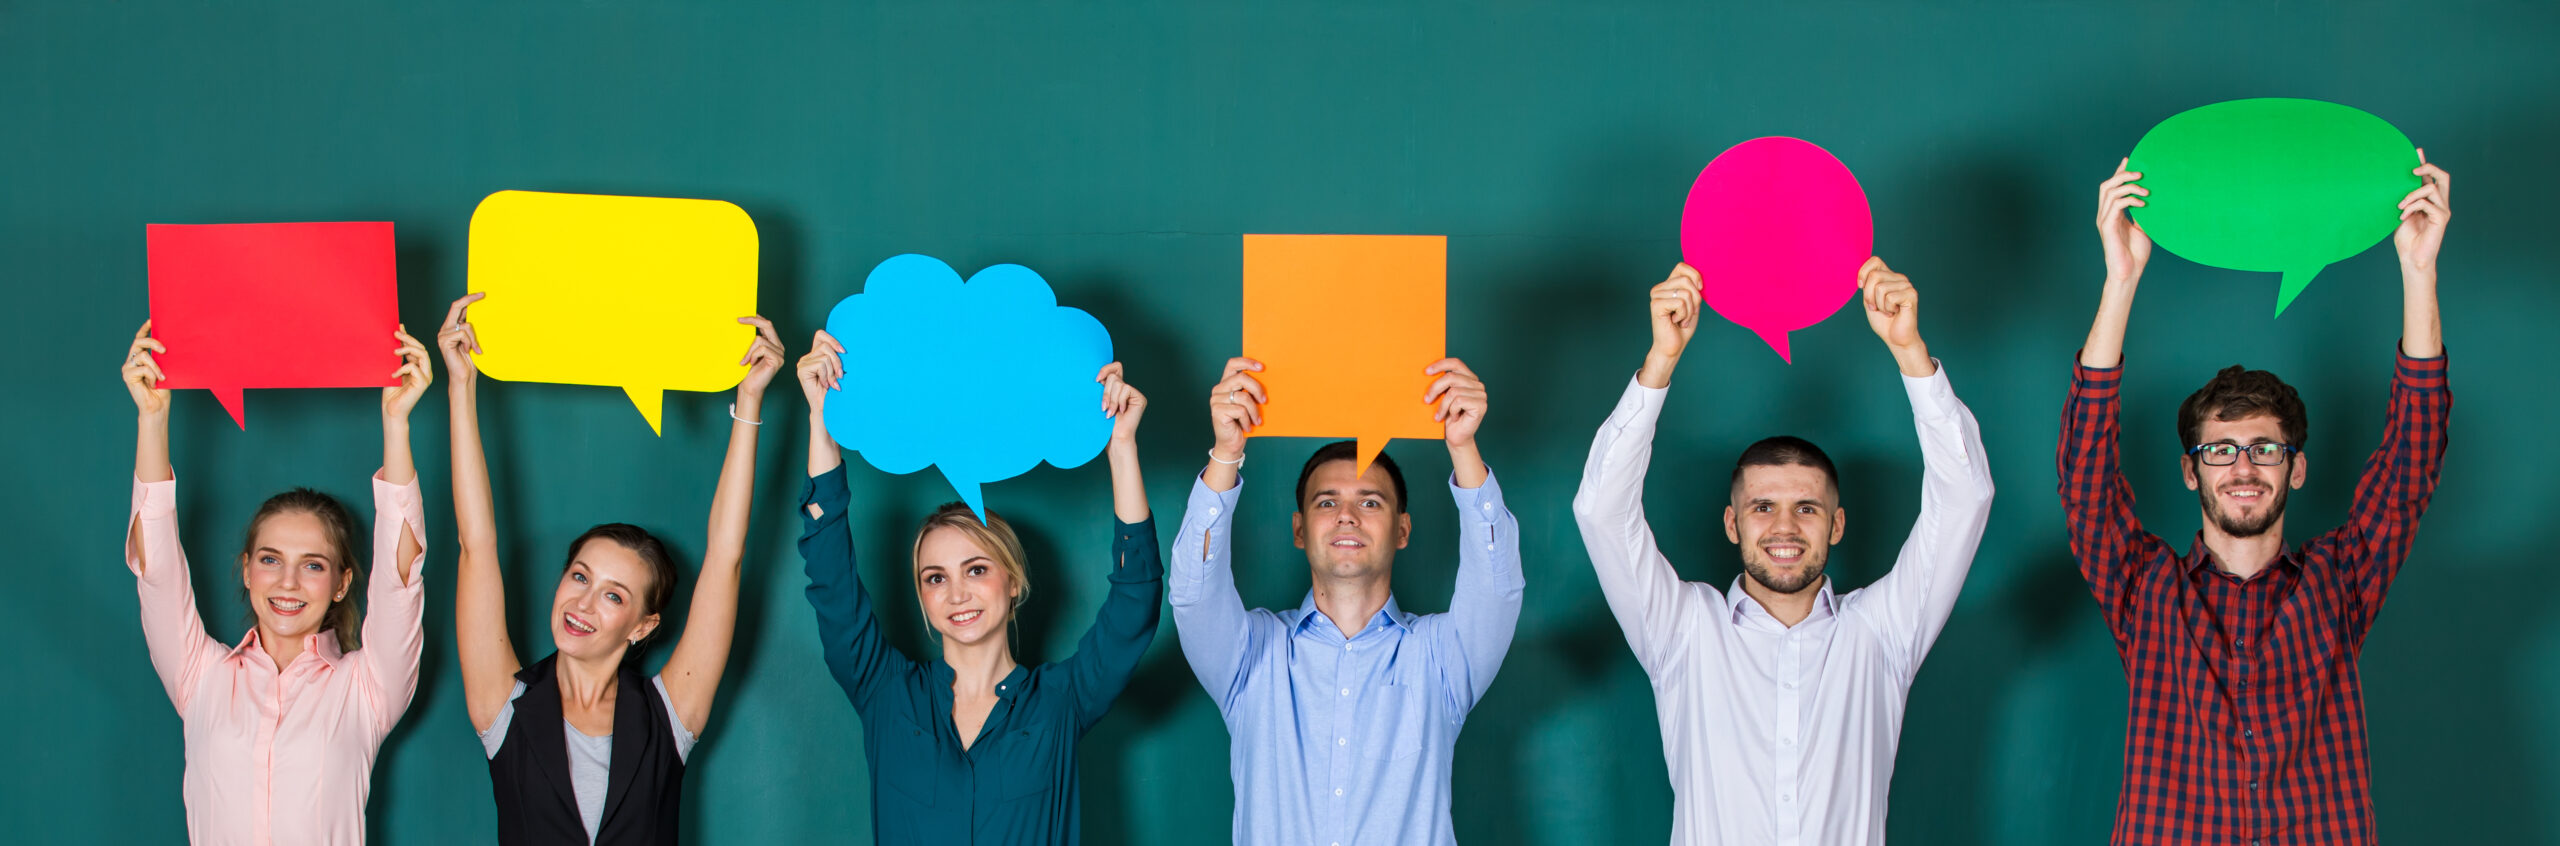 Group of six business people team standing together and holding colorful and different shapes of speech bubbles.